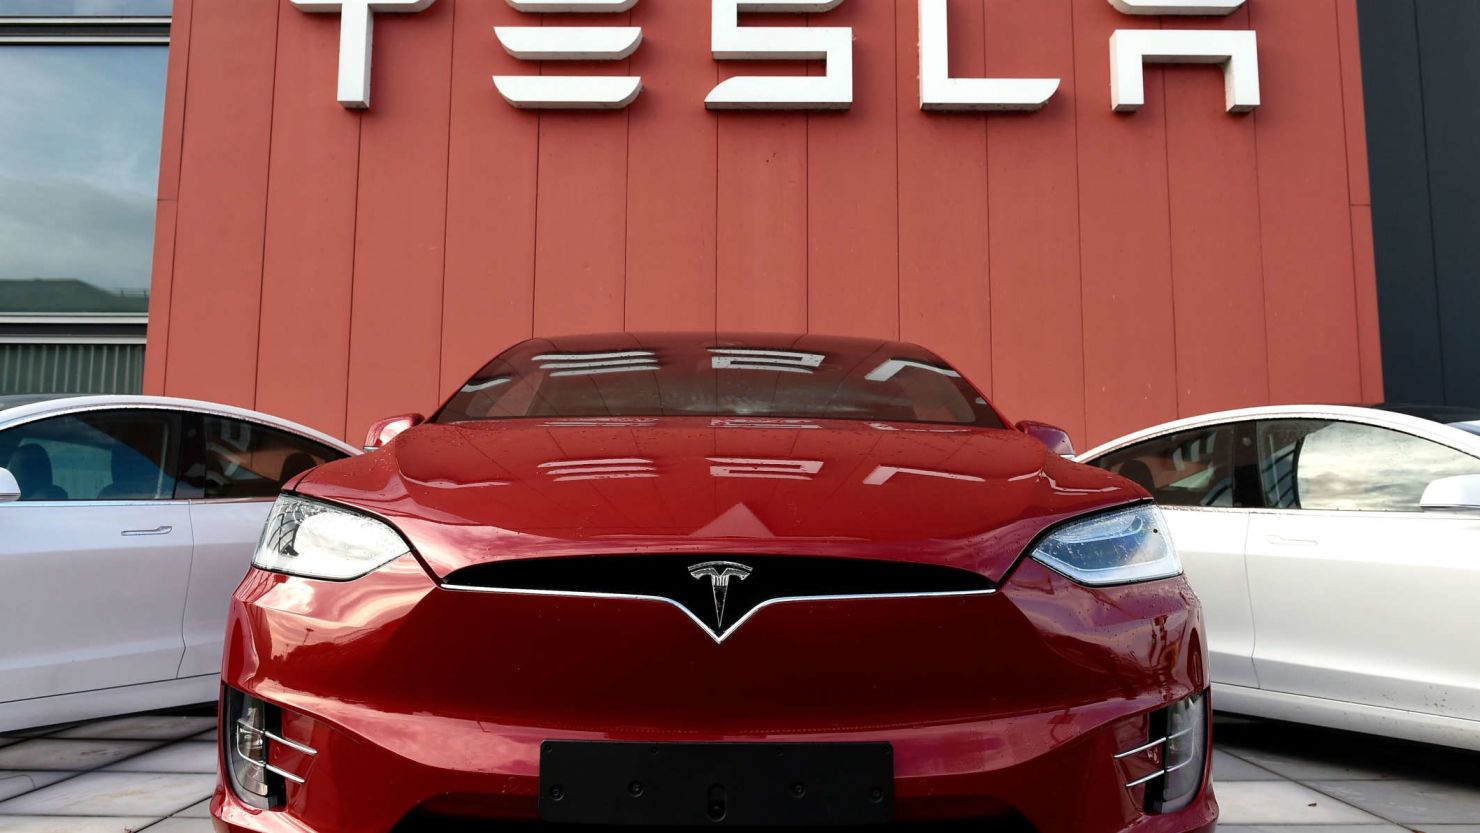 The Thai government says it's in talks with Tesla to build a production facility in the country